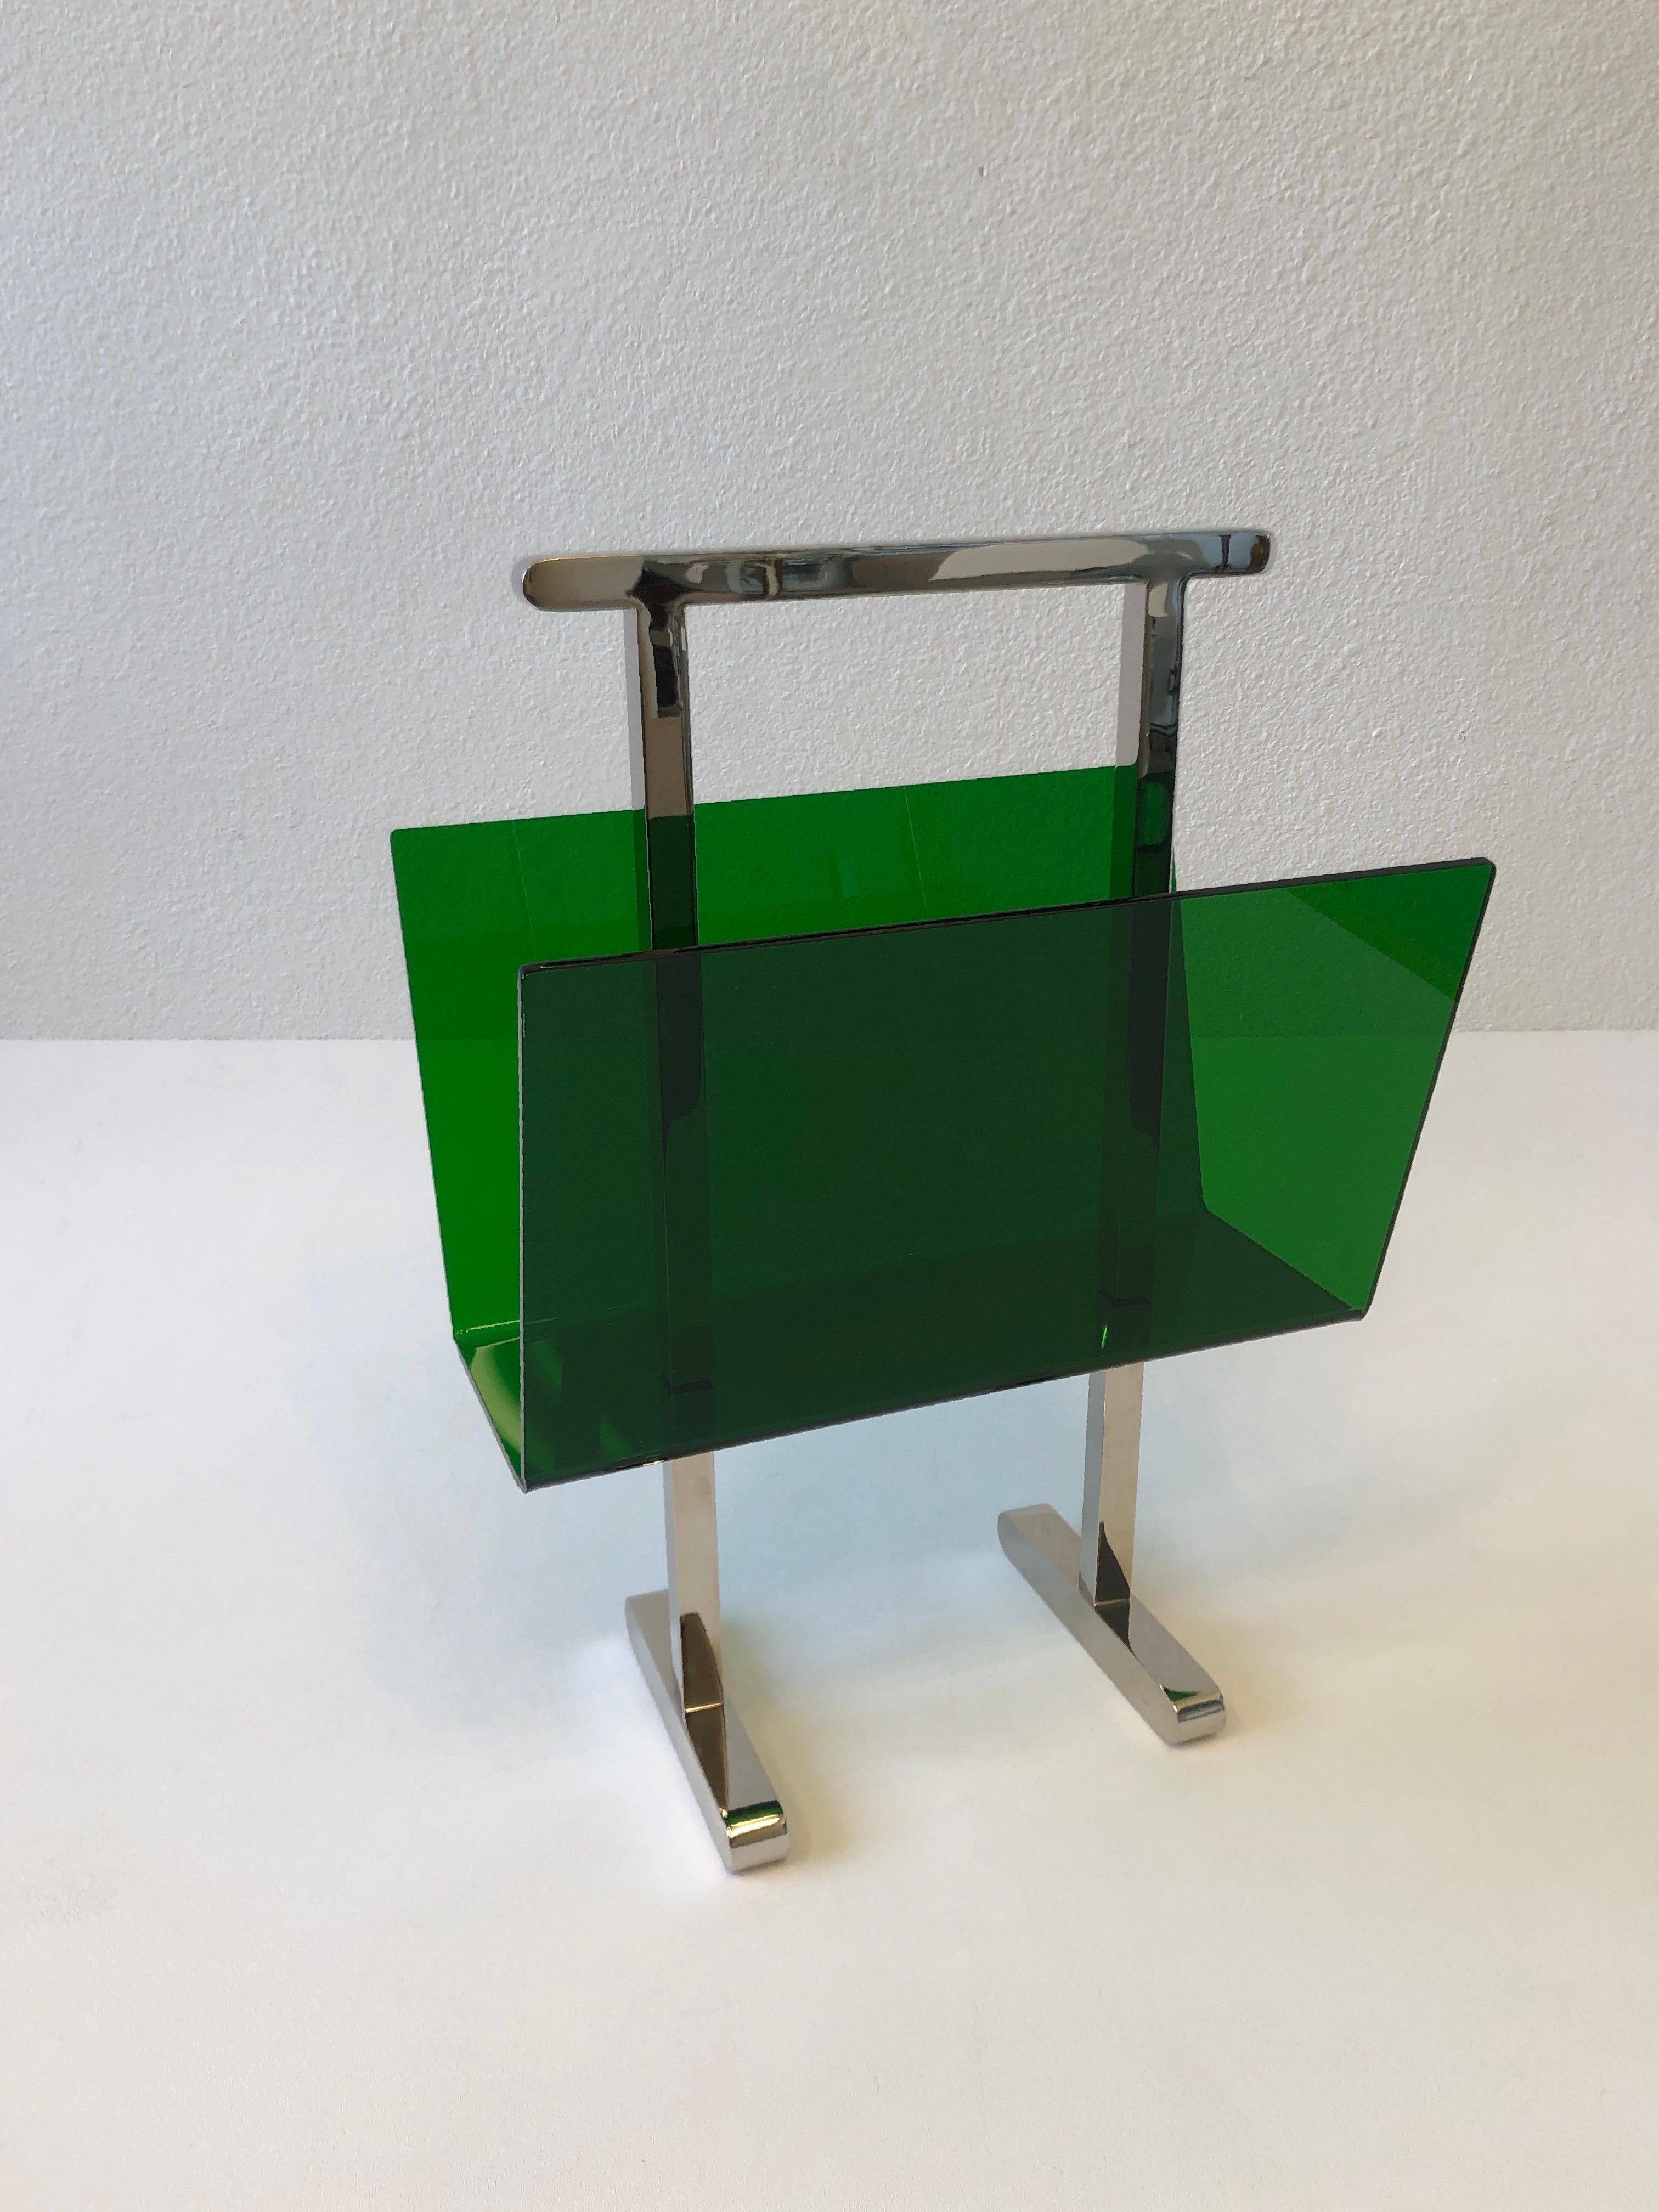 Green lucite and polish nickel magazine holder by American renowned designer Charles Hollis Jones. Part of CHJ new line of colored lucite designs. Available in other colors. 
Measurements: 9.25” Deep, 14.5” Wide, 20” High.